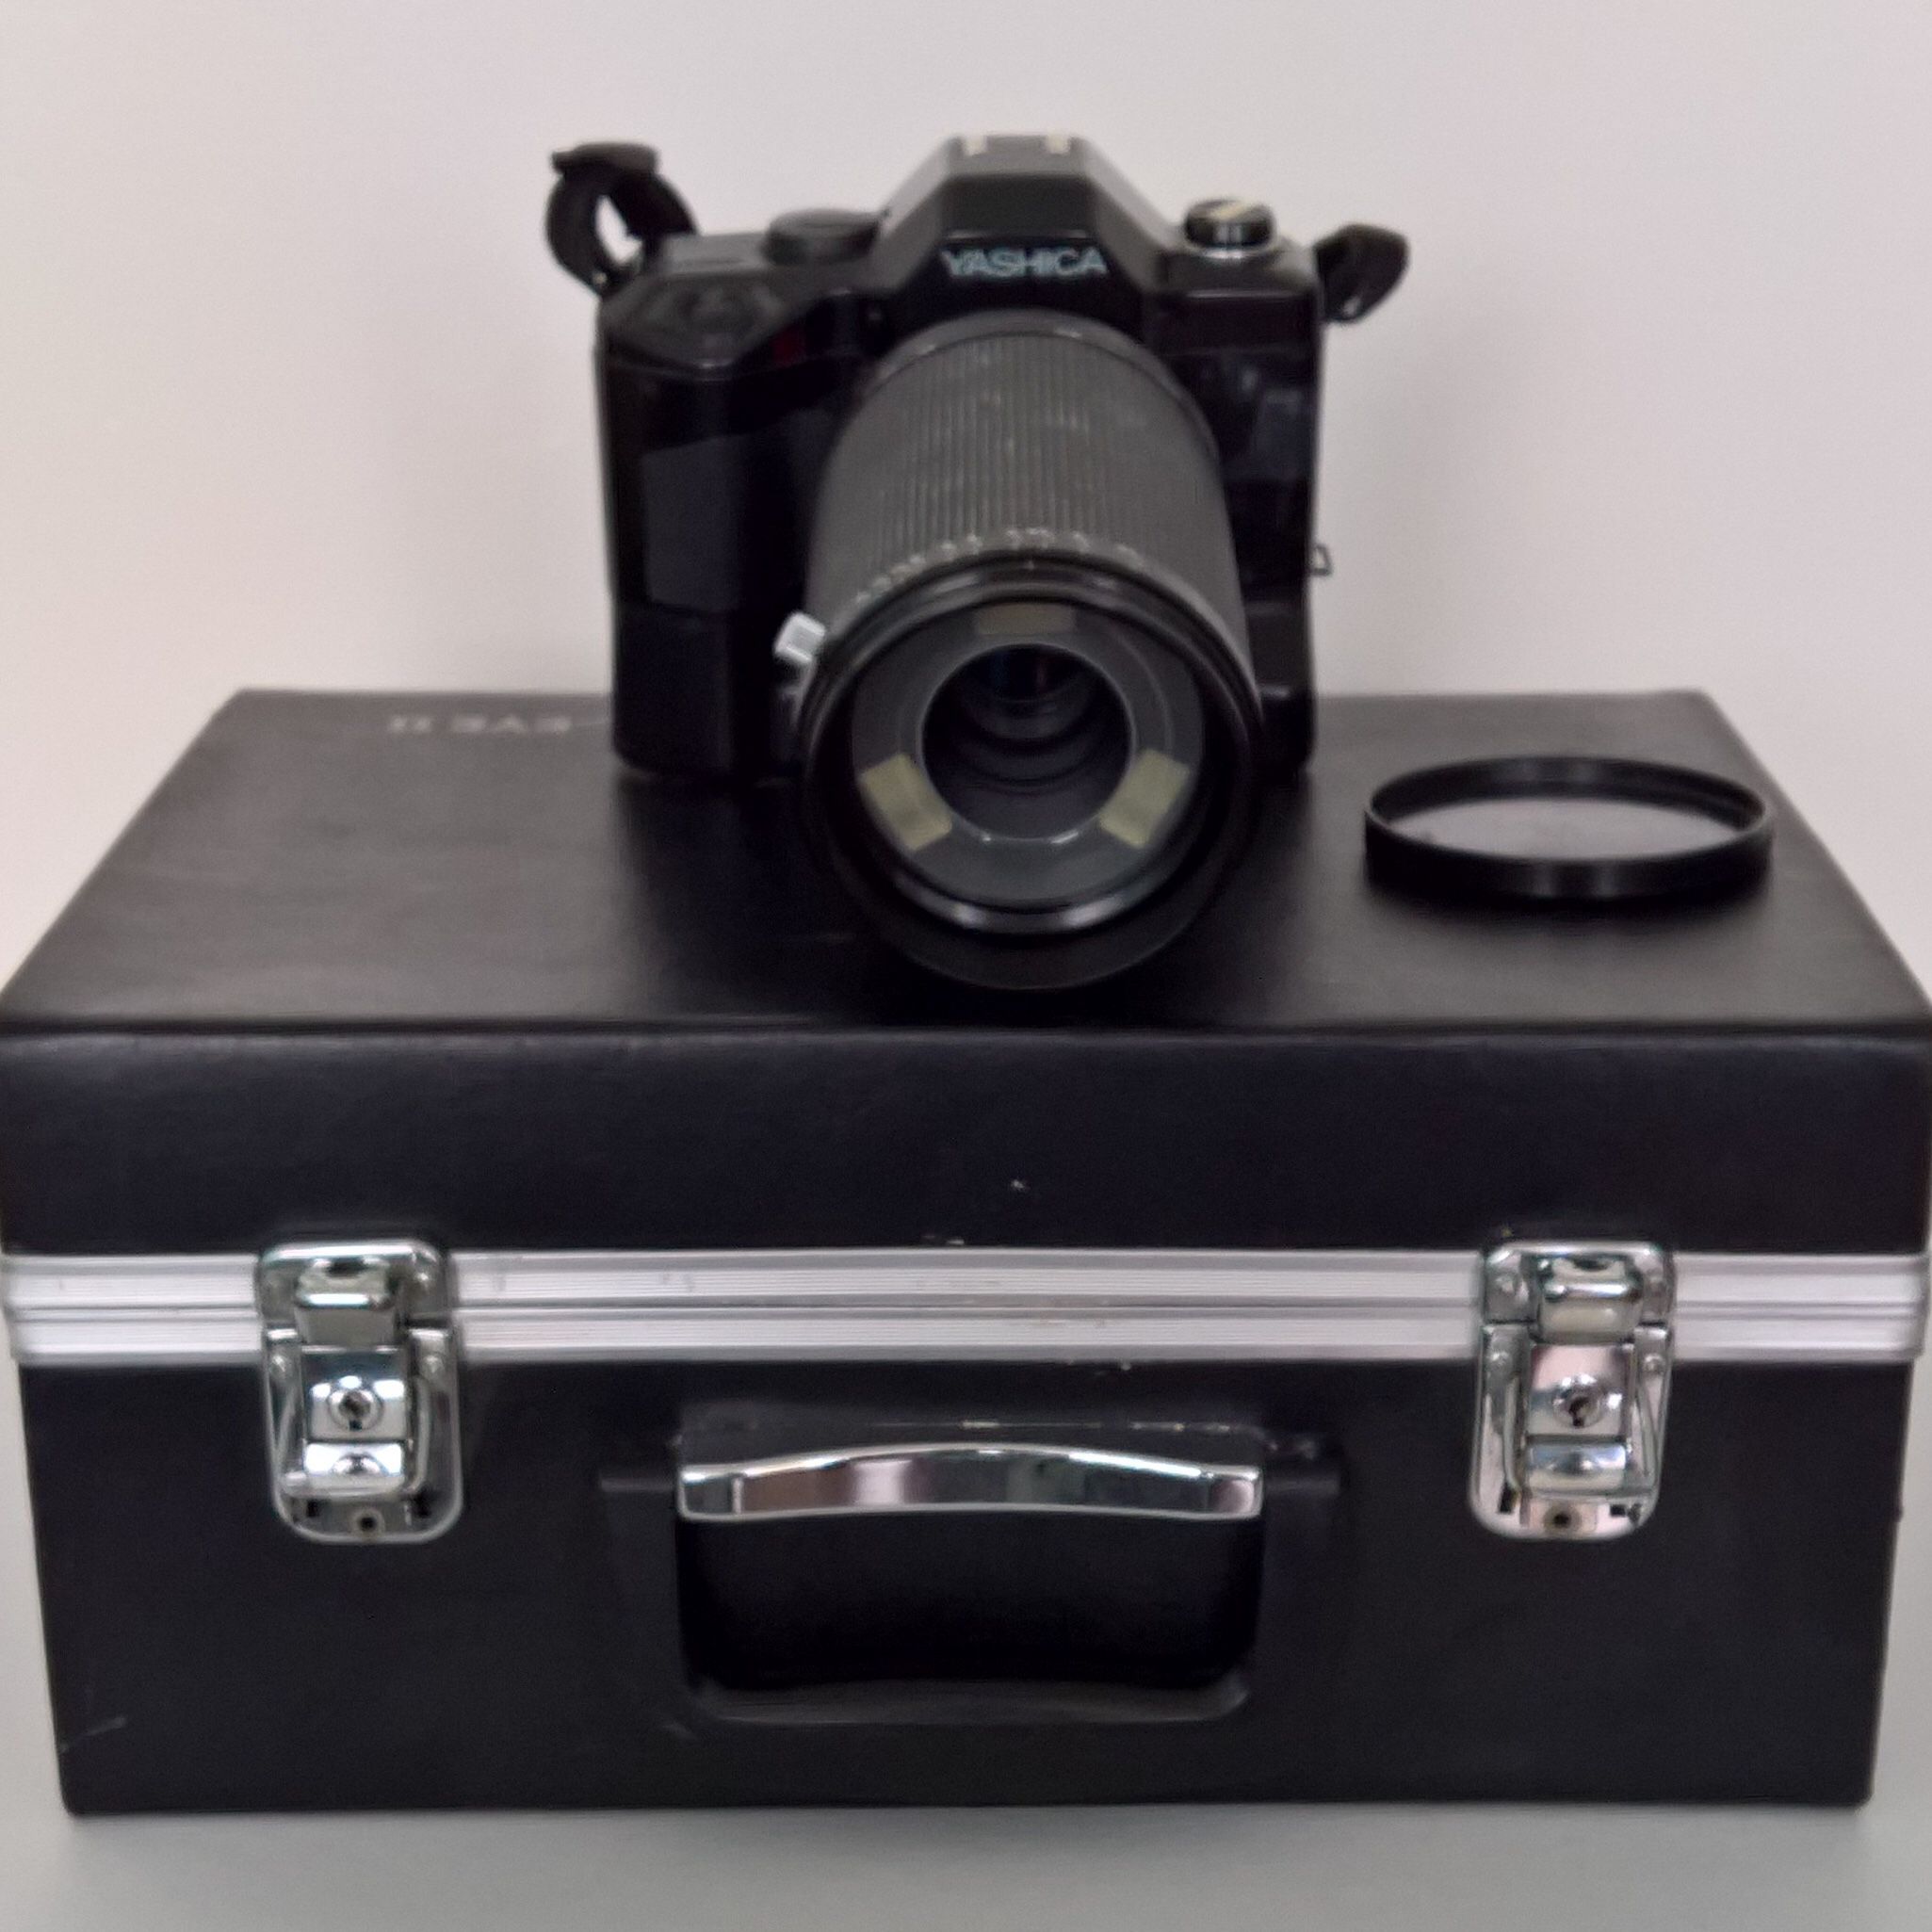 Yashica Dental Eye II Vintage Film Camera with Case and Strap 